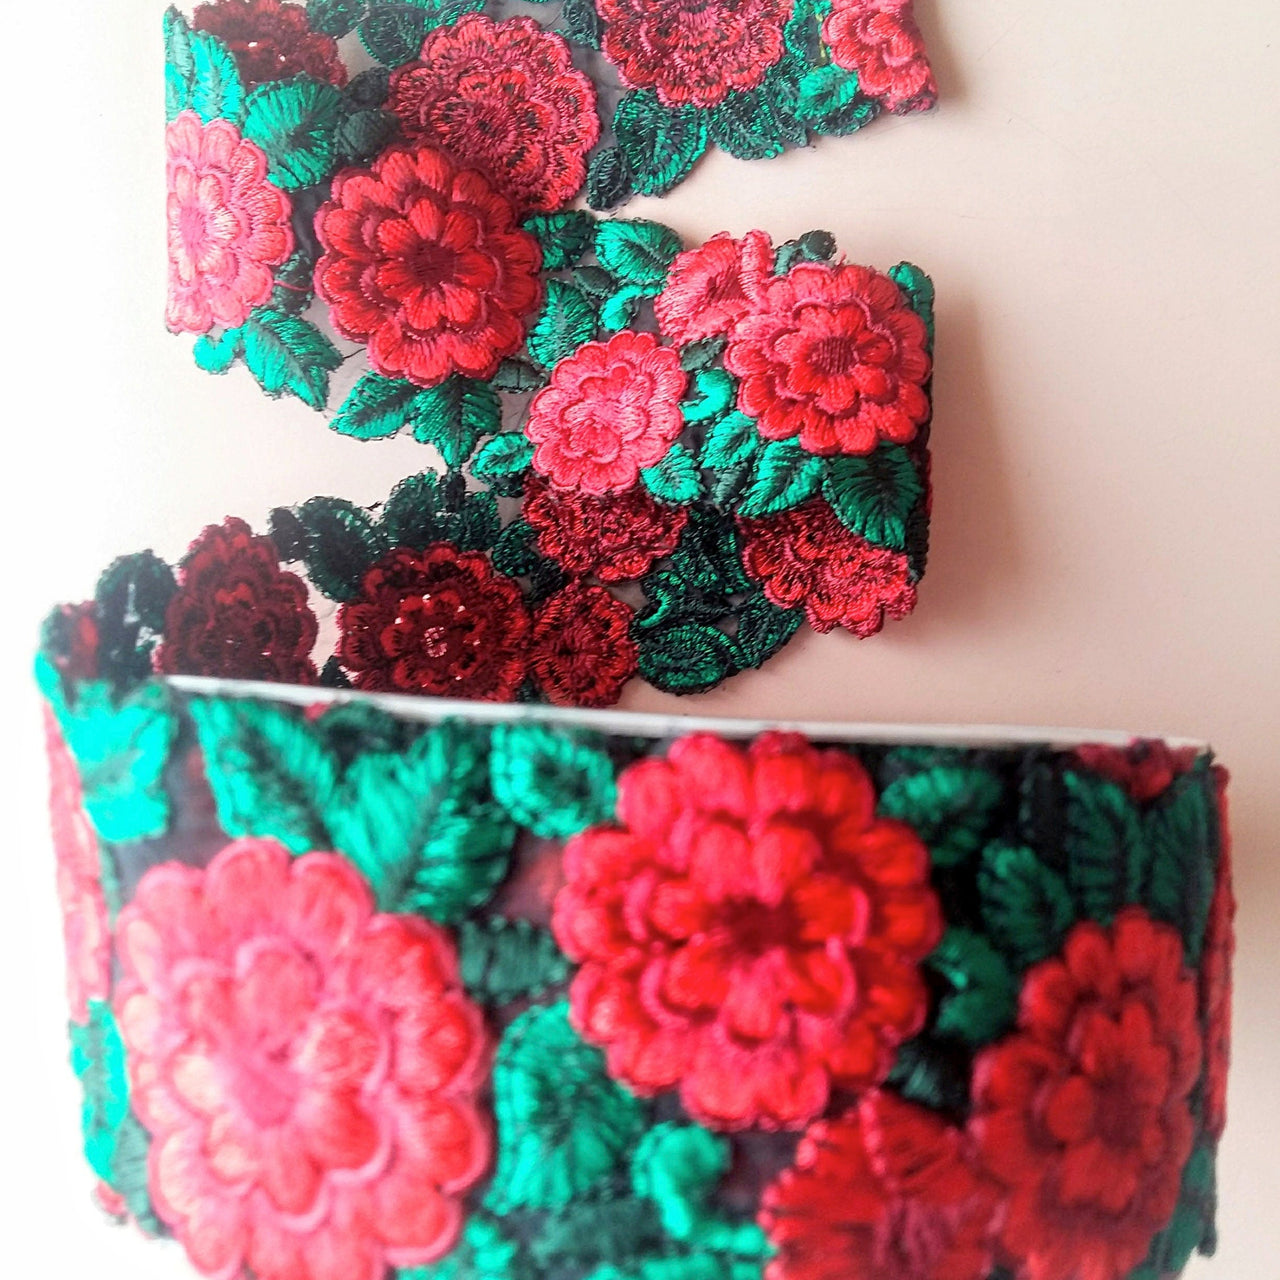 Black Fabric Trim With Red And Green Floral Embroidery, 50mm wide - 200317L332